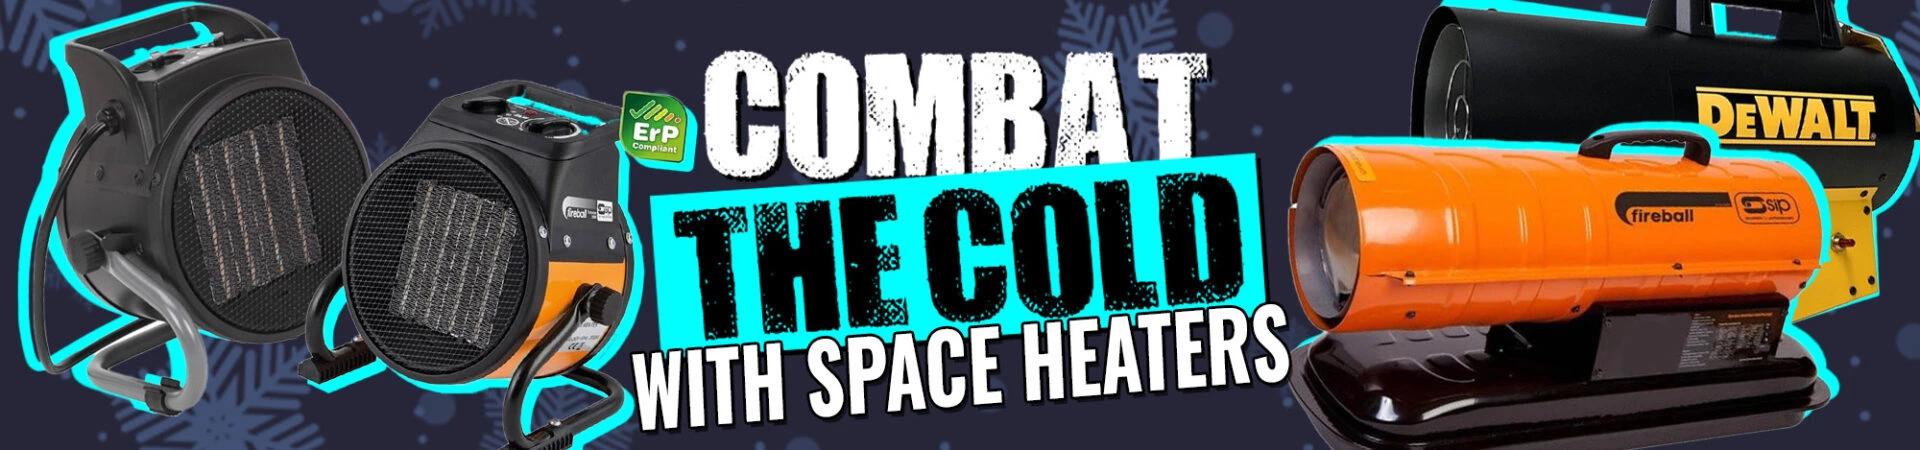 Combat the cold with space heaters on a banner with 2 electric heaters and 2 space heaters shown.